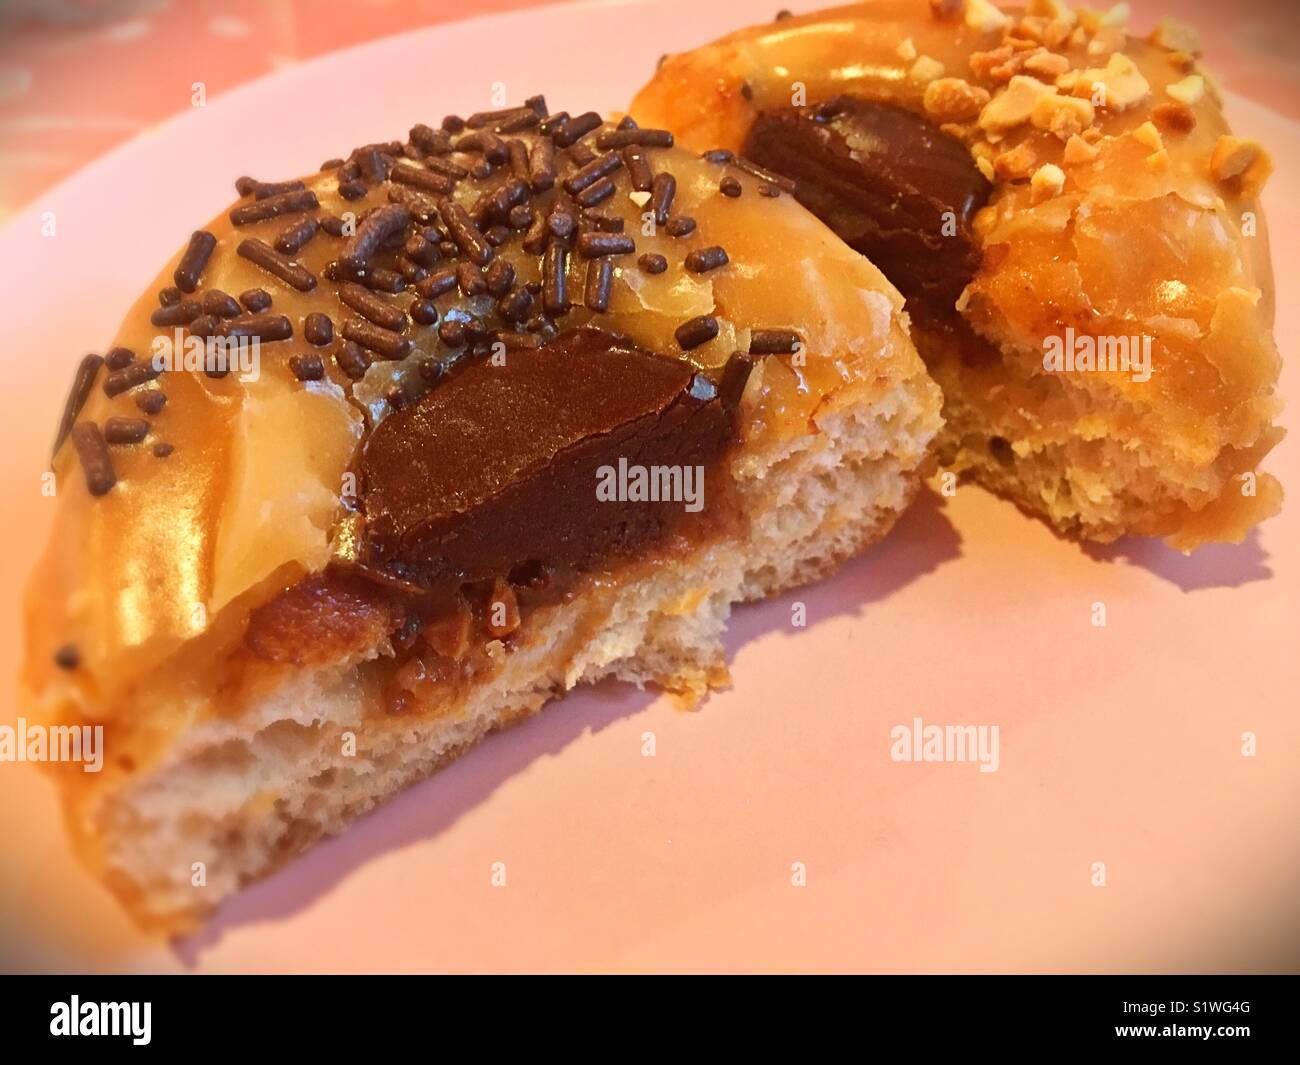 A peanut butter and chocolate donut cut in half. Stock Photo